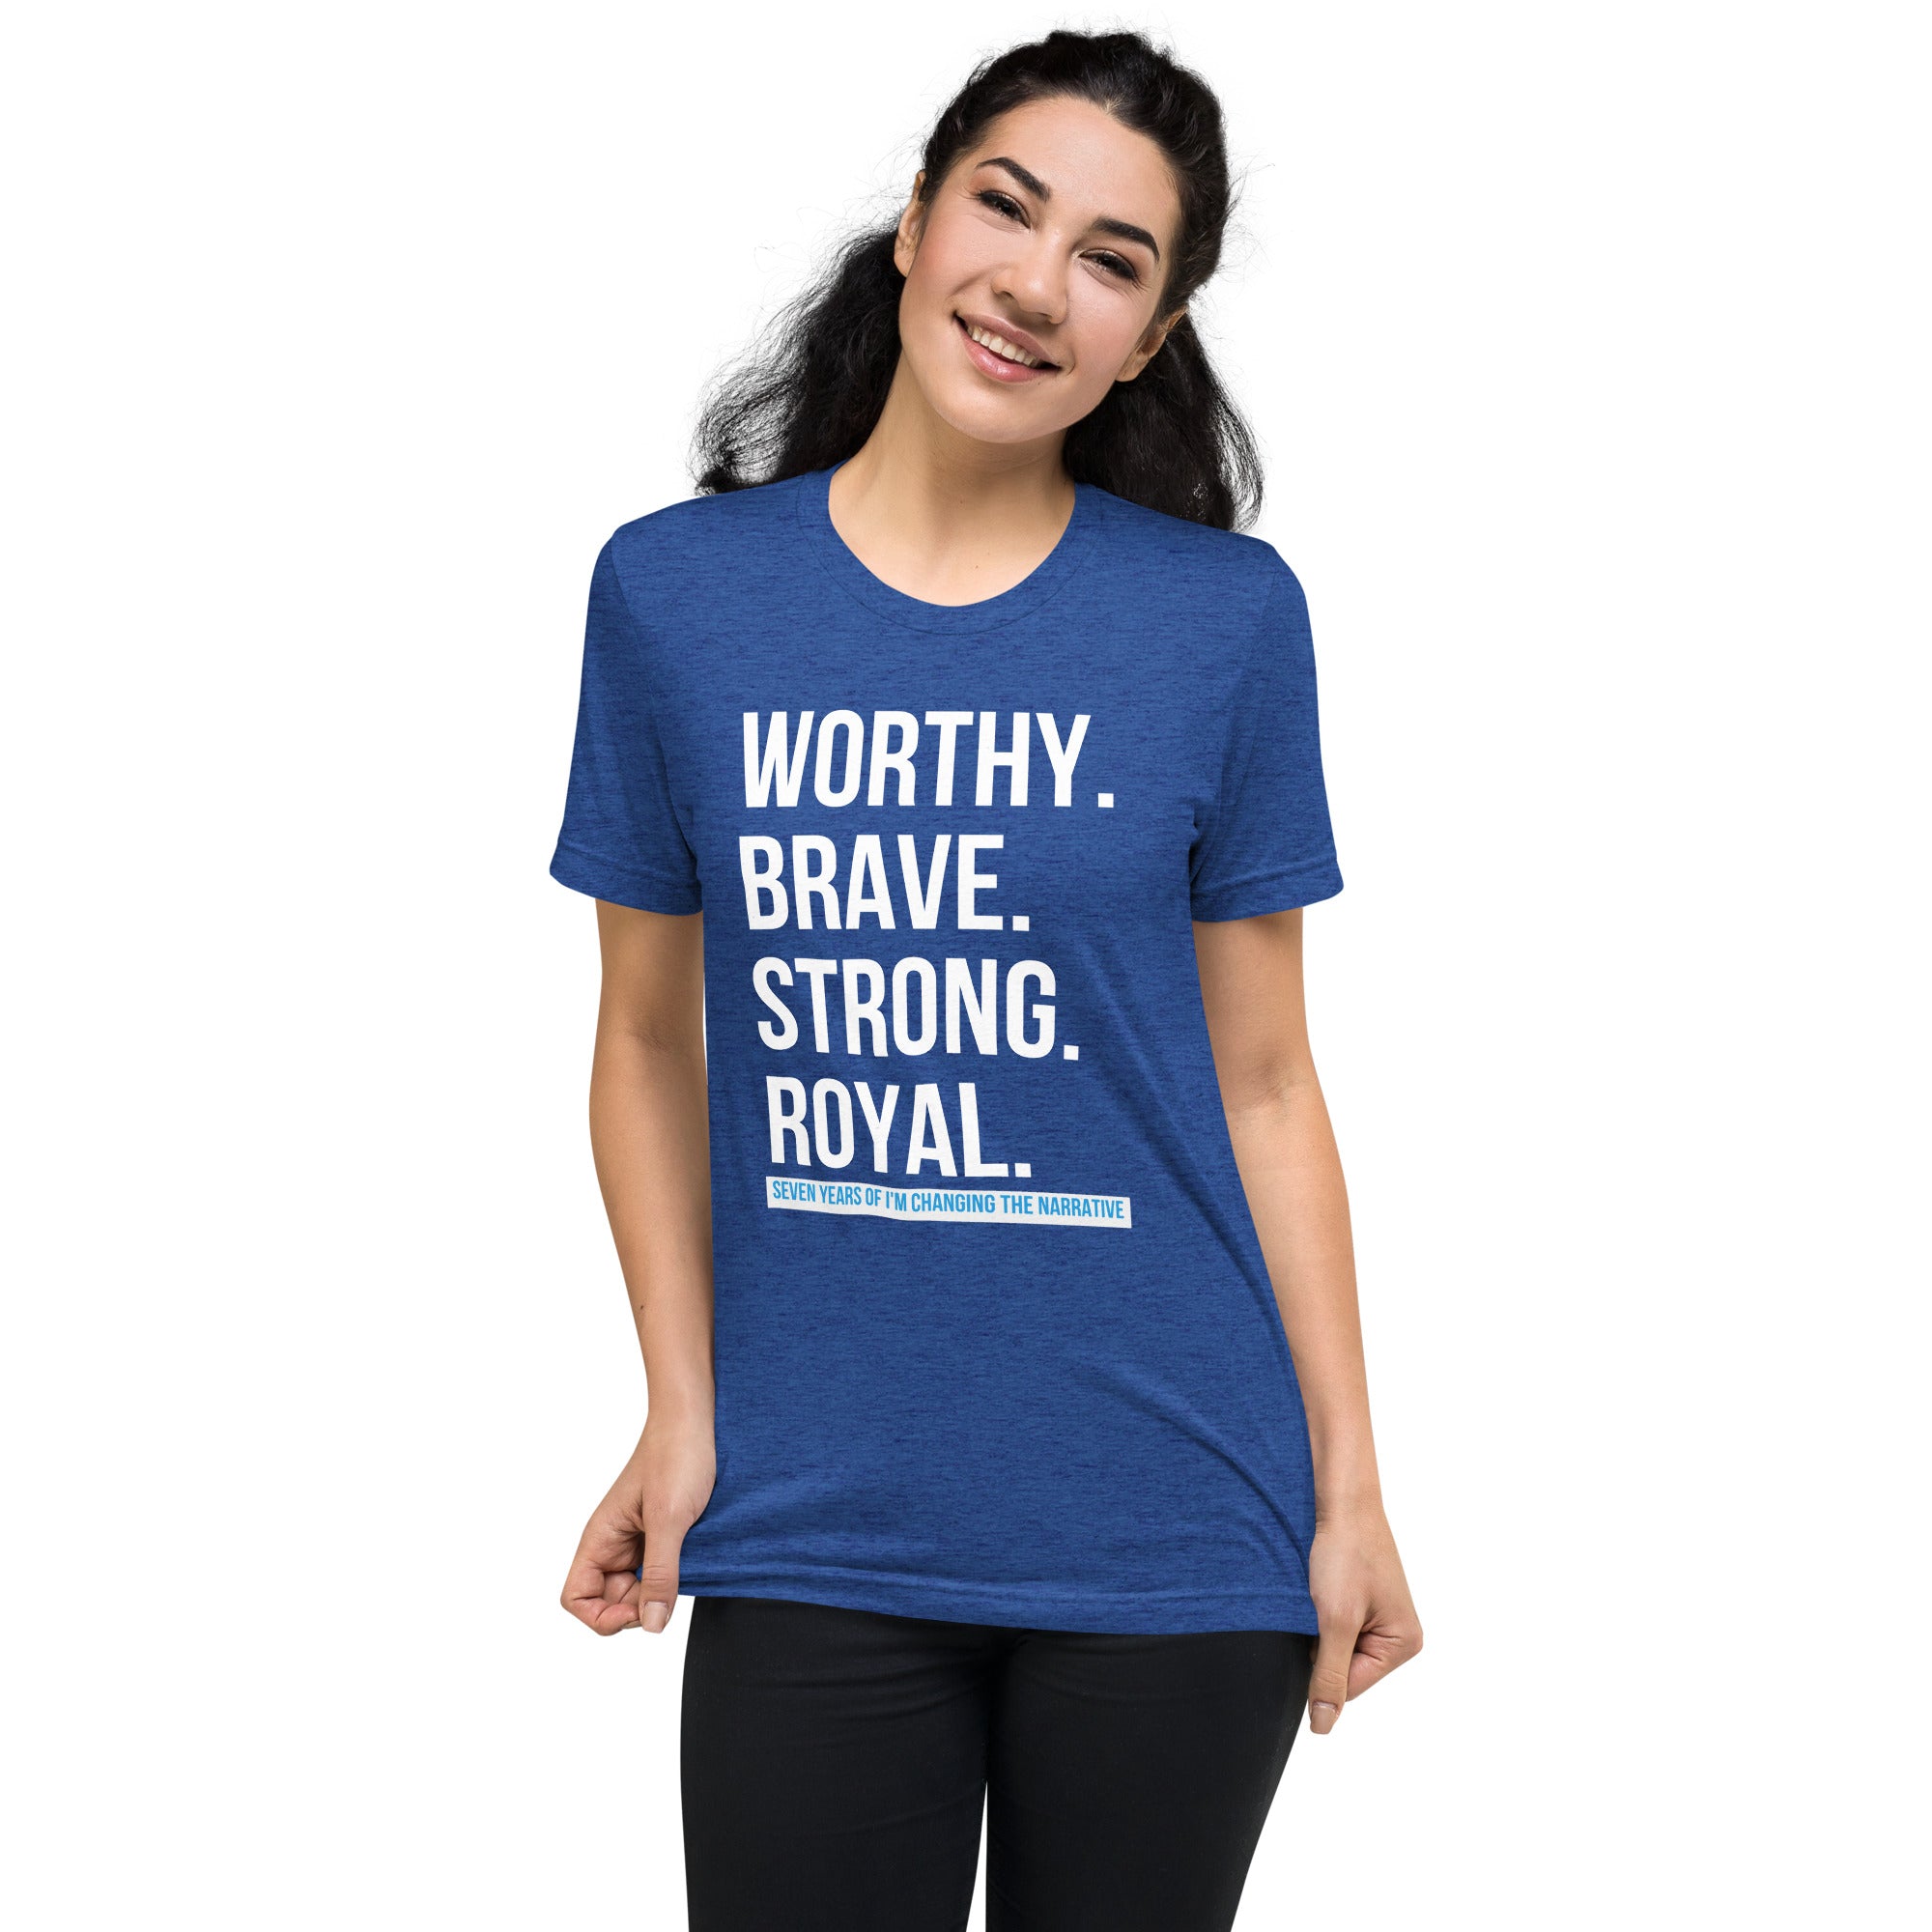 Worthy, Brave, Strong - Short sleeve t-shirt